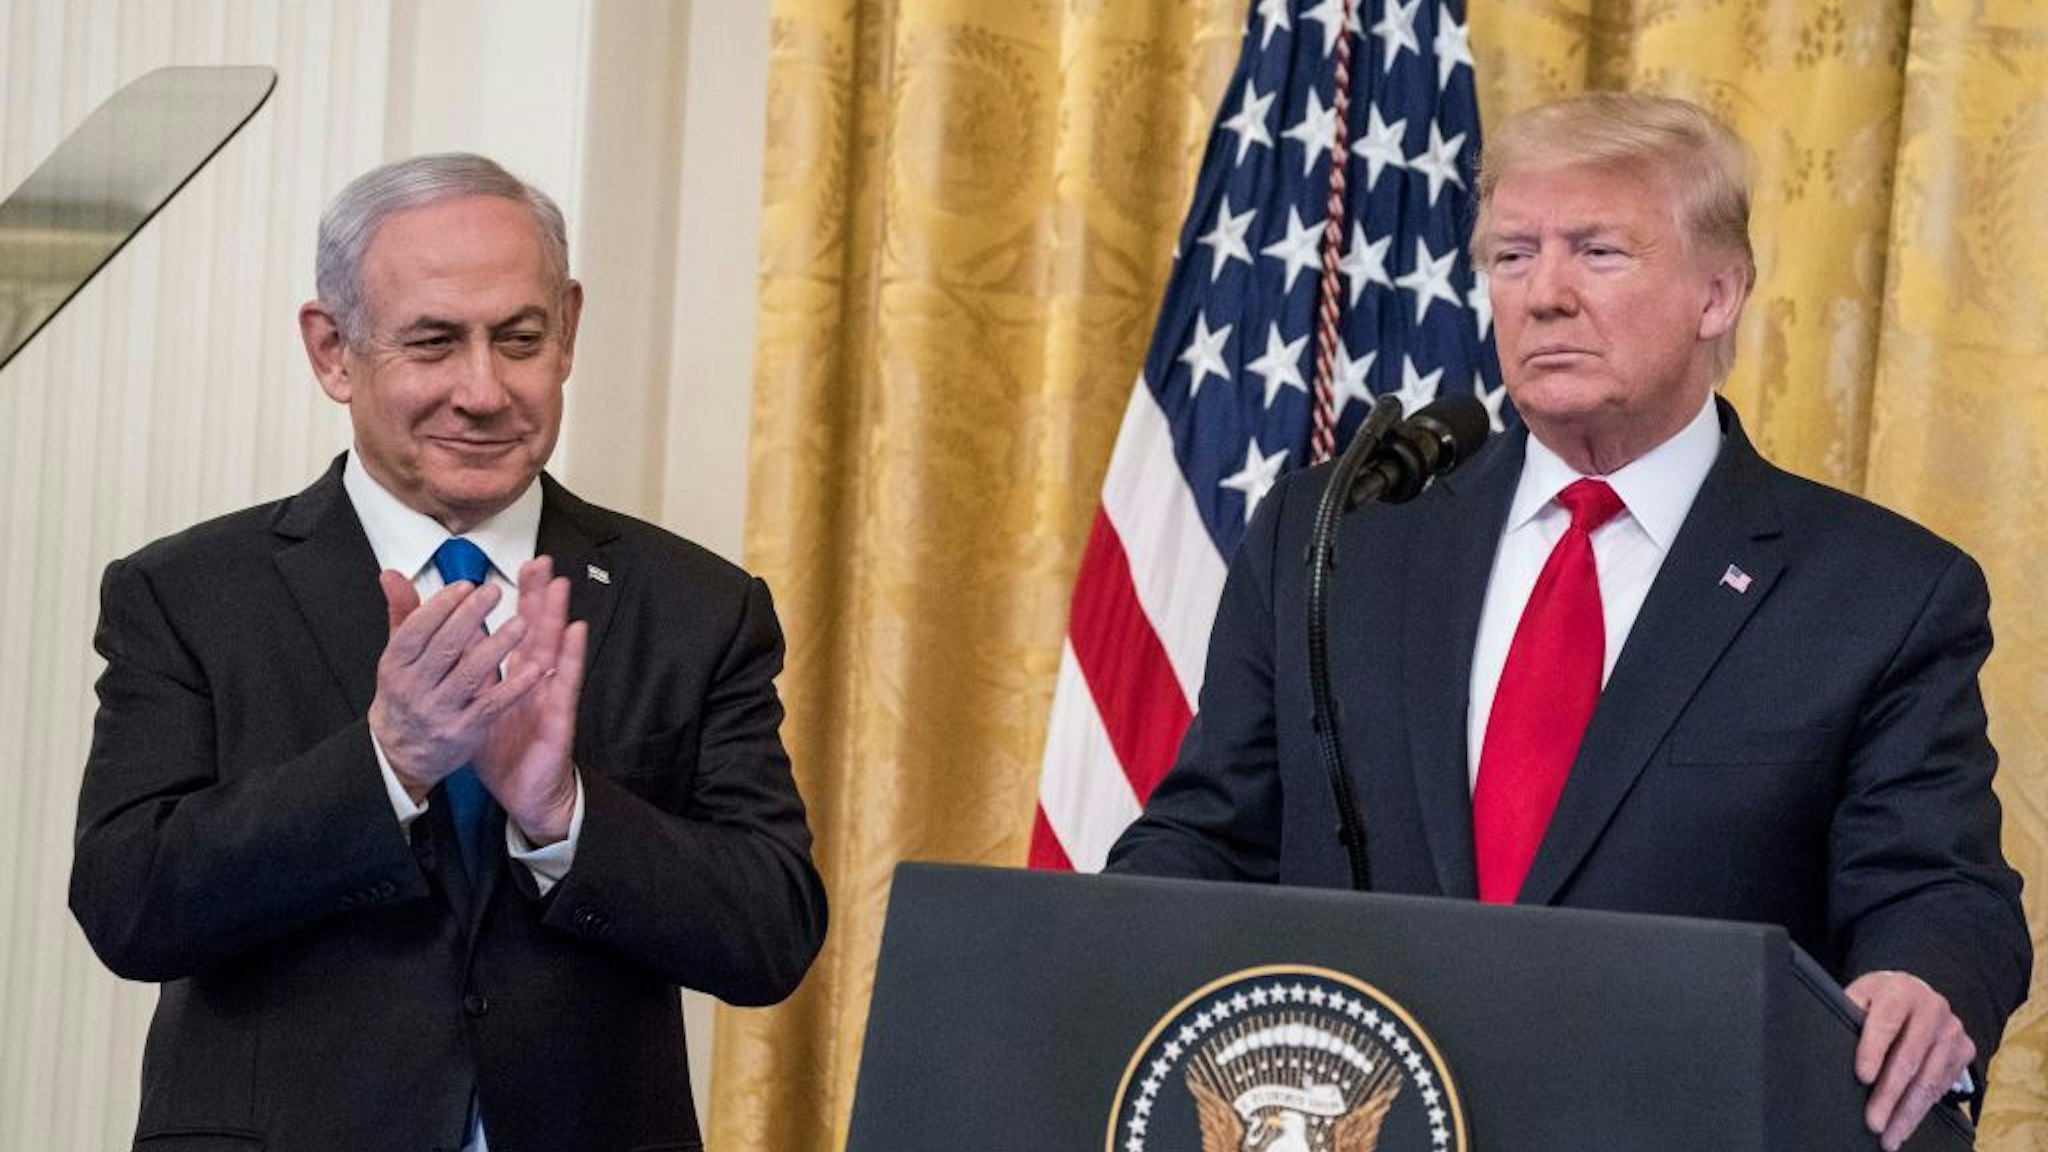 WASHINGTON, DC - JANUARY 28: U.S. President Donald Trump and¬†Israeli Prime Minister Benjamin Netanyahu¬†participate in a joint statement in the East Room of the White House on January 28, 2020 in Washington, DC. The news conference was held to announce the Trump administration's plan to resolve the Israeli-Palestinian conflict. (Photo by Sarah Silbiger/Getty Images)